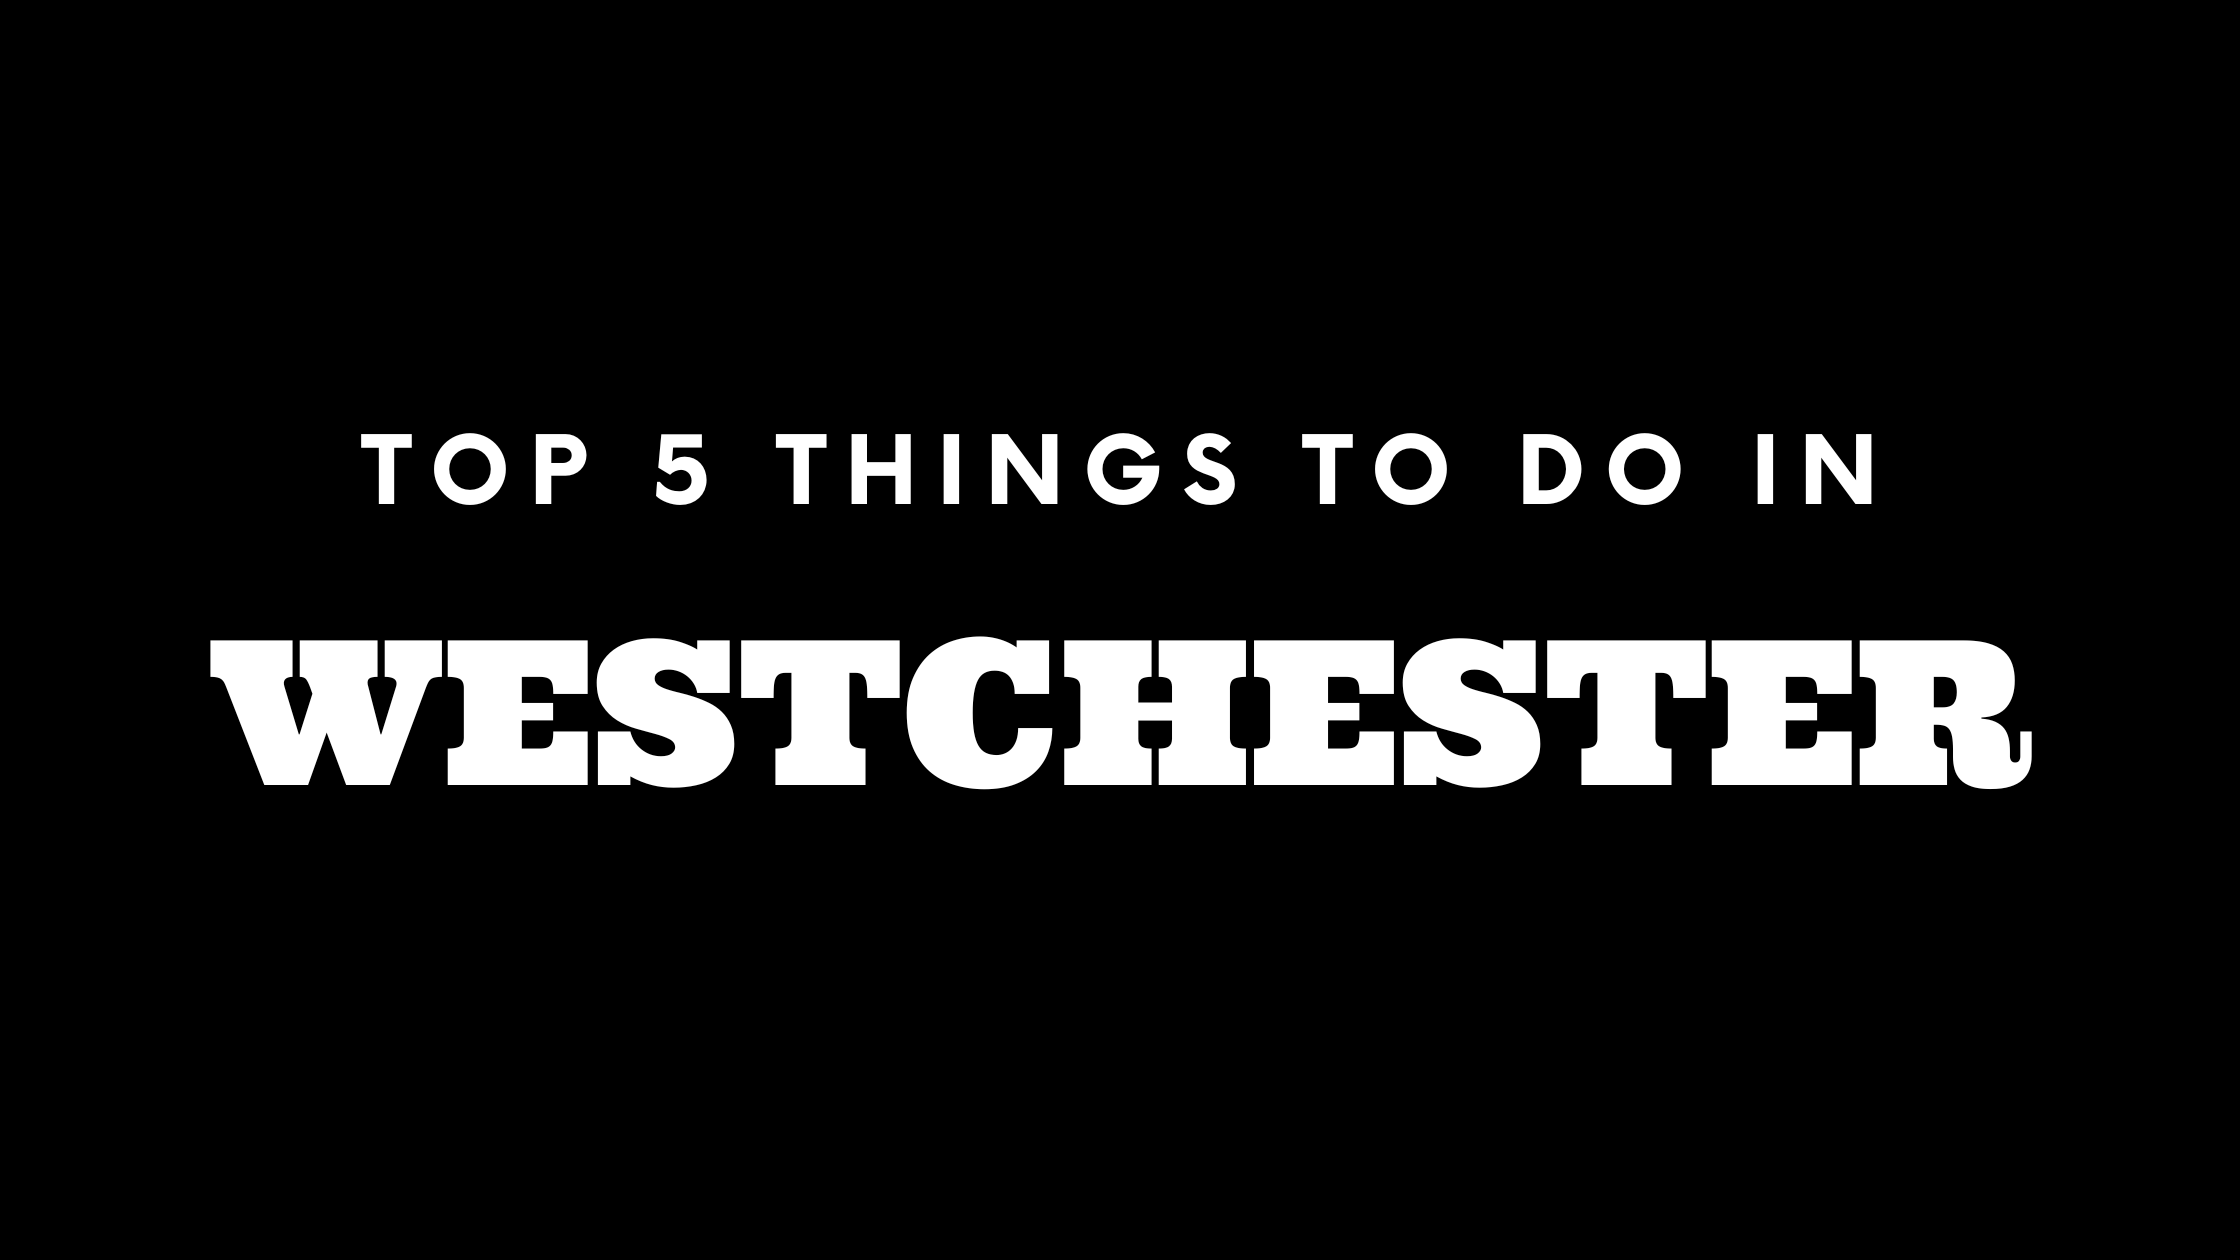 Top 5 Things To Do in Westchester